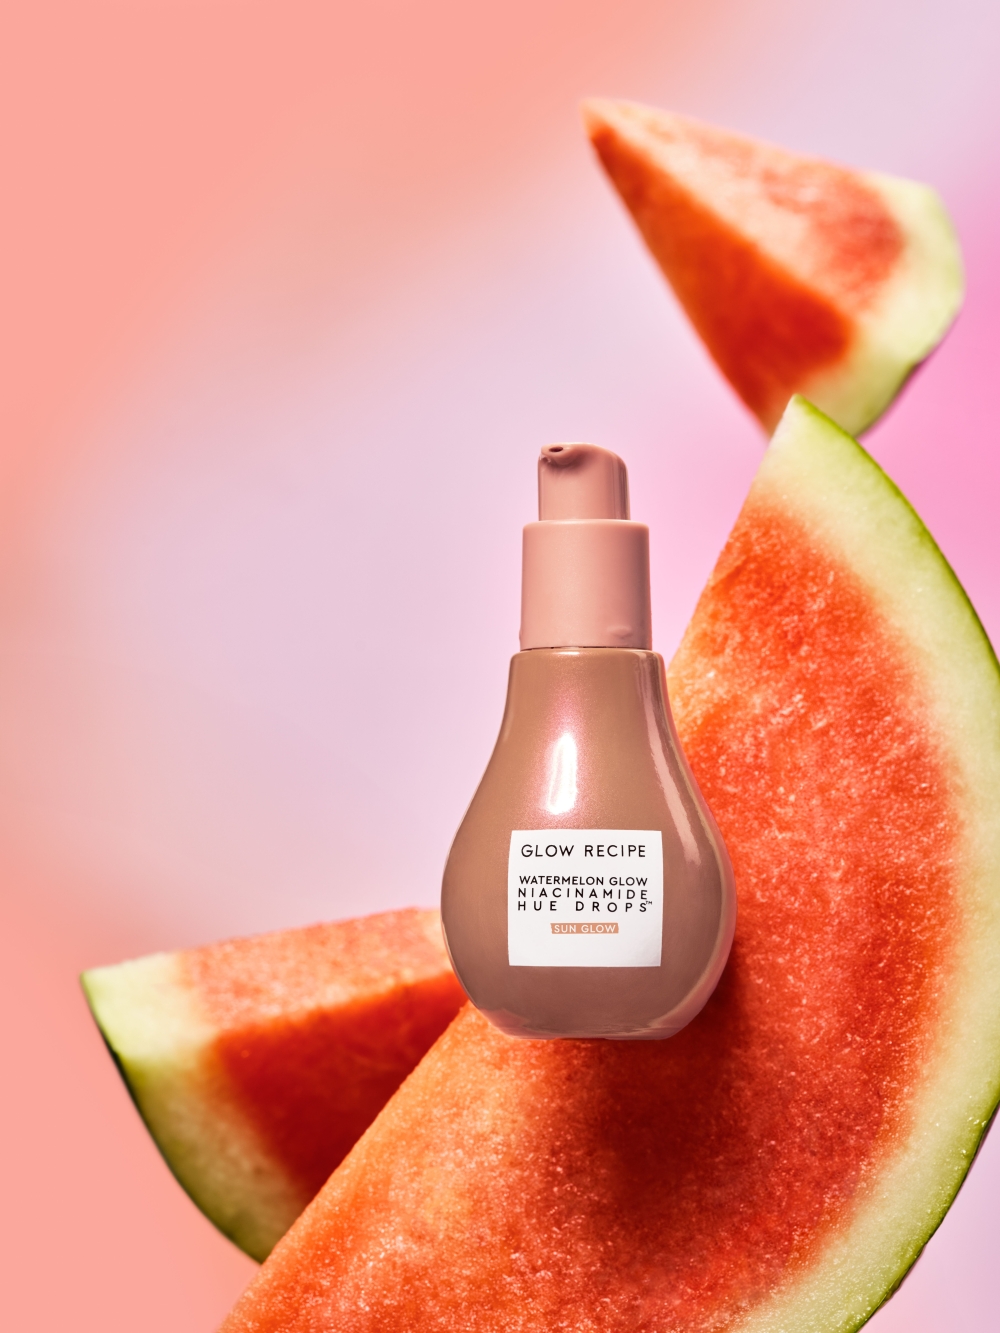 Start practicing 'skinimalism' with Glow Recipe Watermelon Glow Niacinamide Hue Drops. — Picture courtesy of Glow Recipe